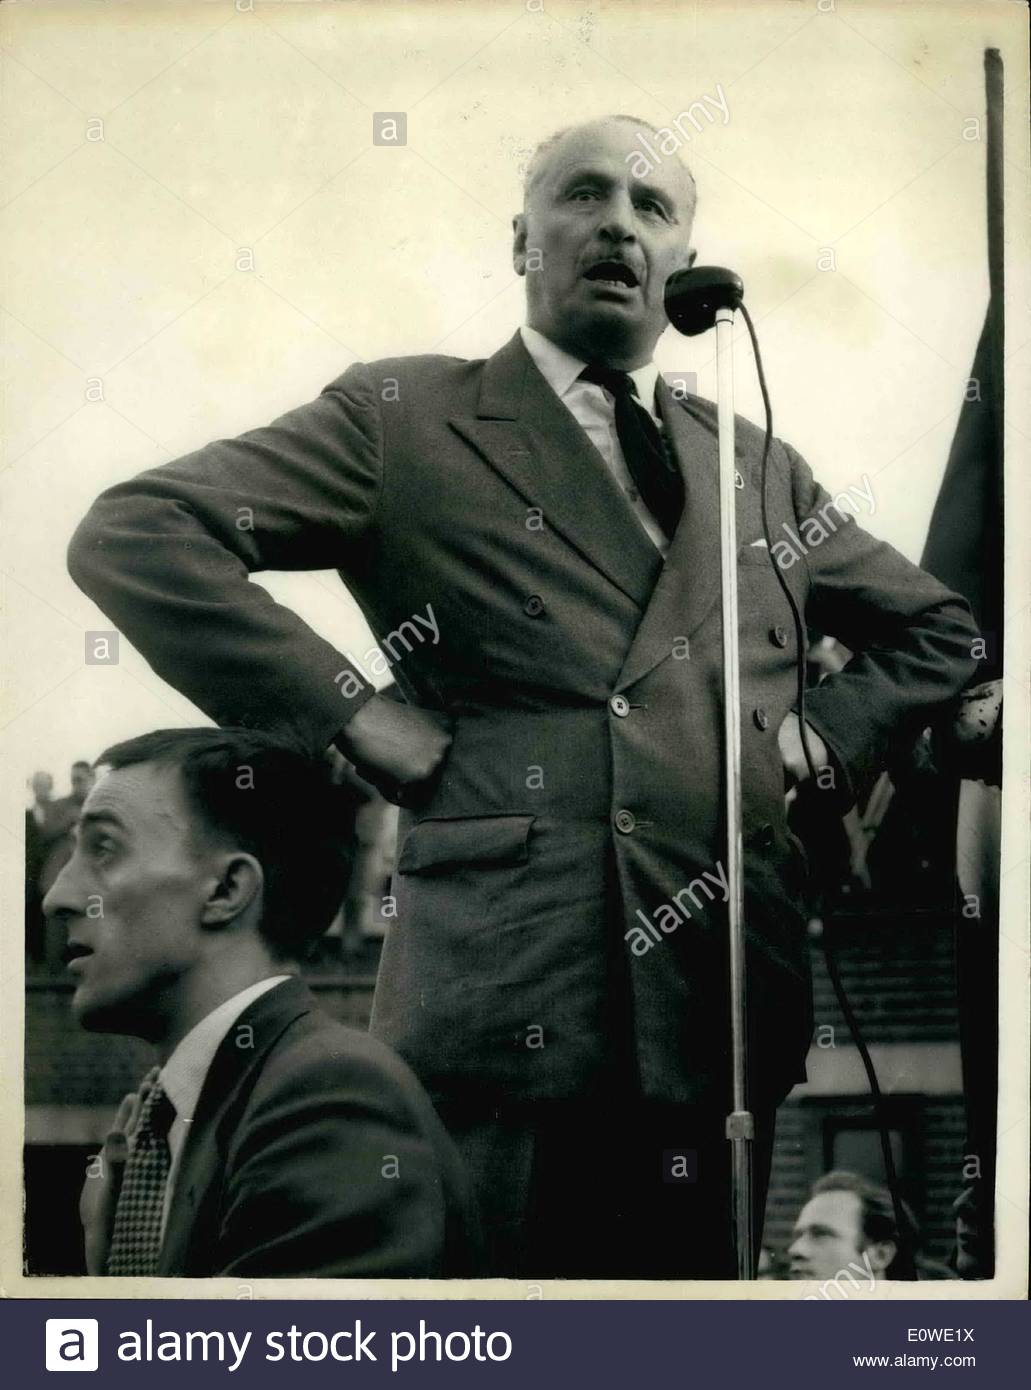 jul-07-1962-mosley-riots-today-photo-shows-sir-oswald-mosley-speaking-E0WE1X.jpg